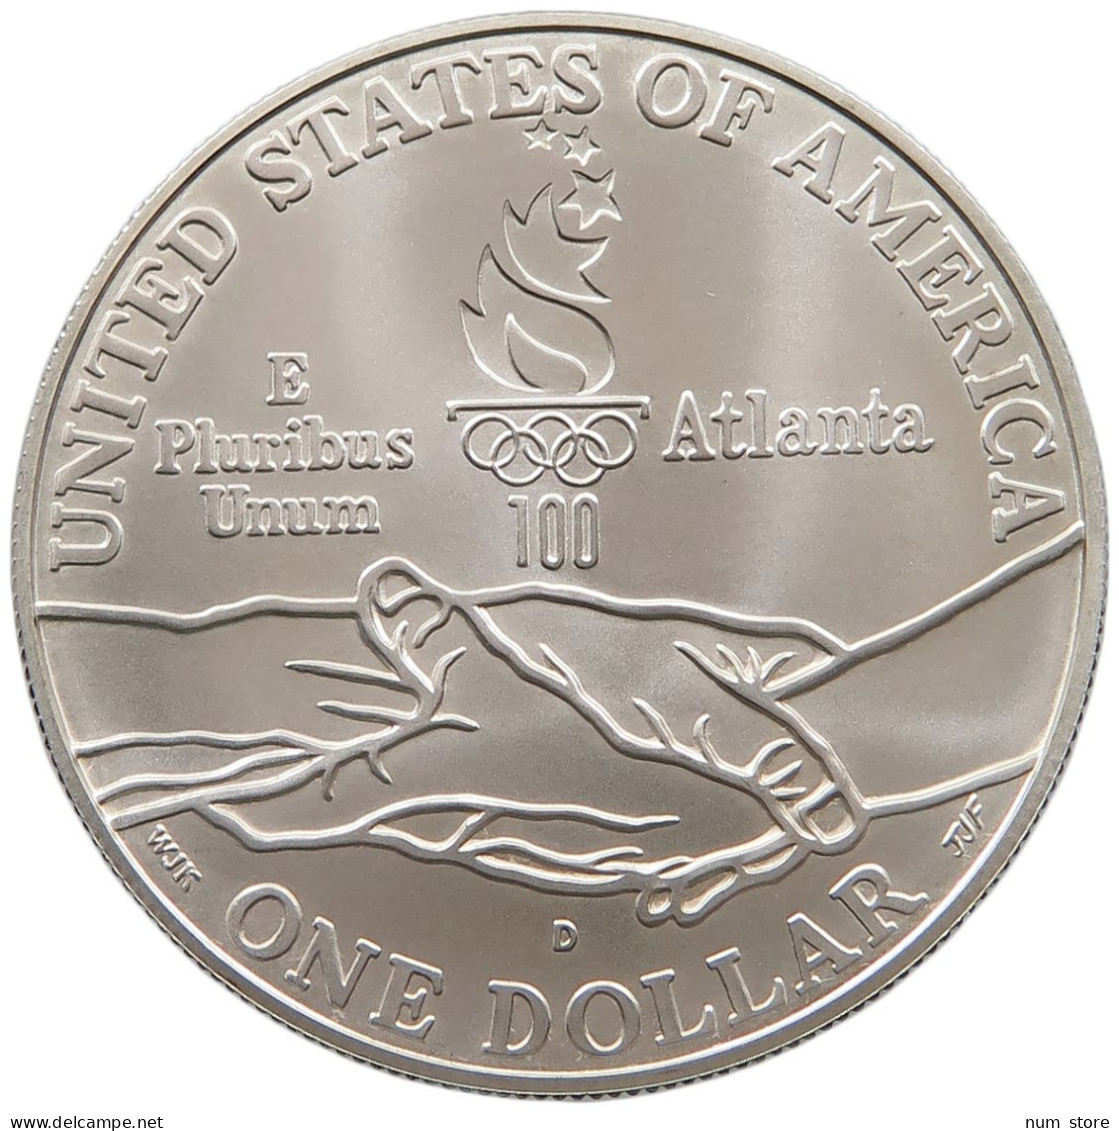 UNITED STATES OF AMERICA DOLLAR 1995 D PEACE #t140 0449 - 1979-1999: Anthony